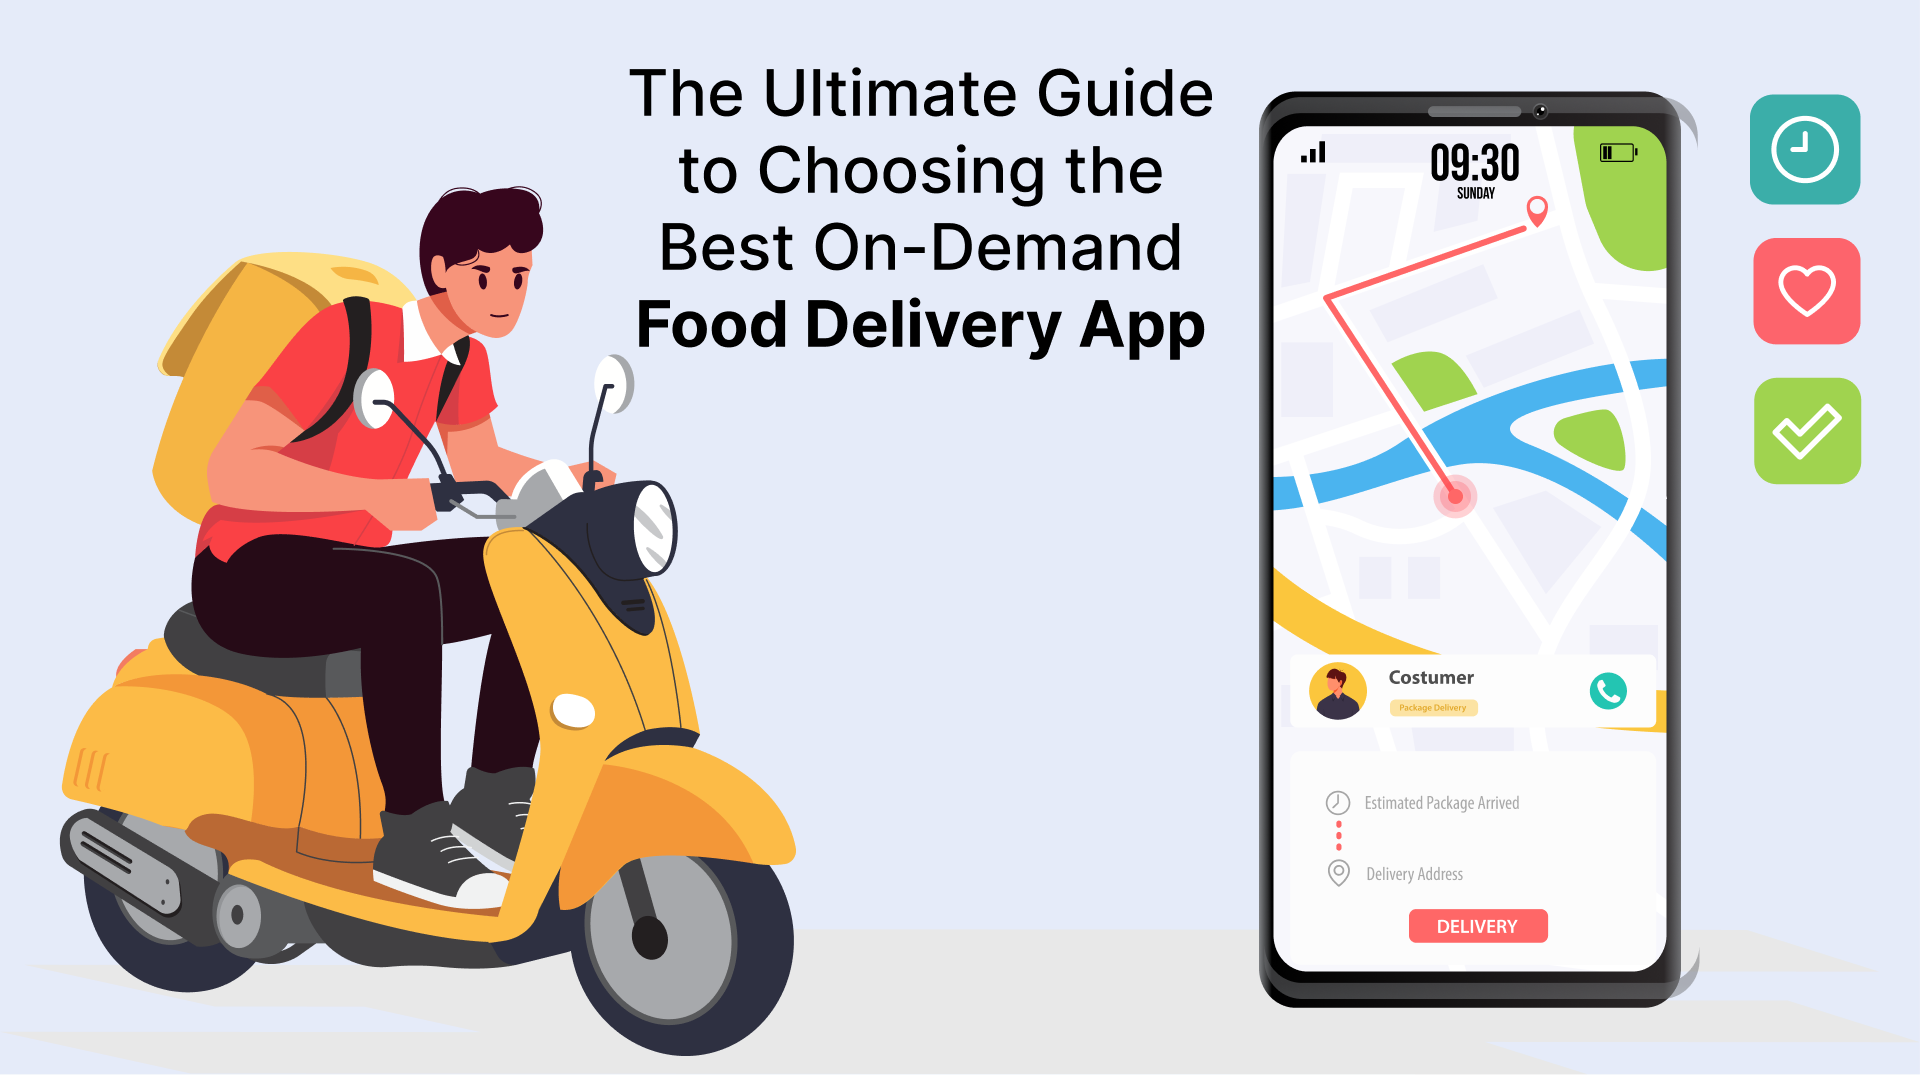 The Ultimate Guide
to Choosing the
py Best On-Demand

2 Food Delivery App